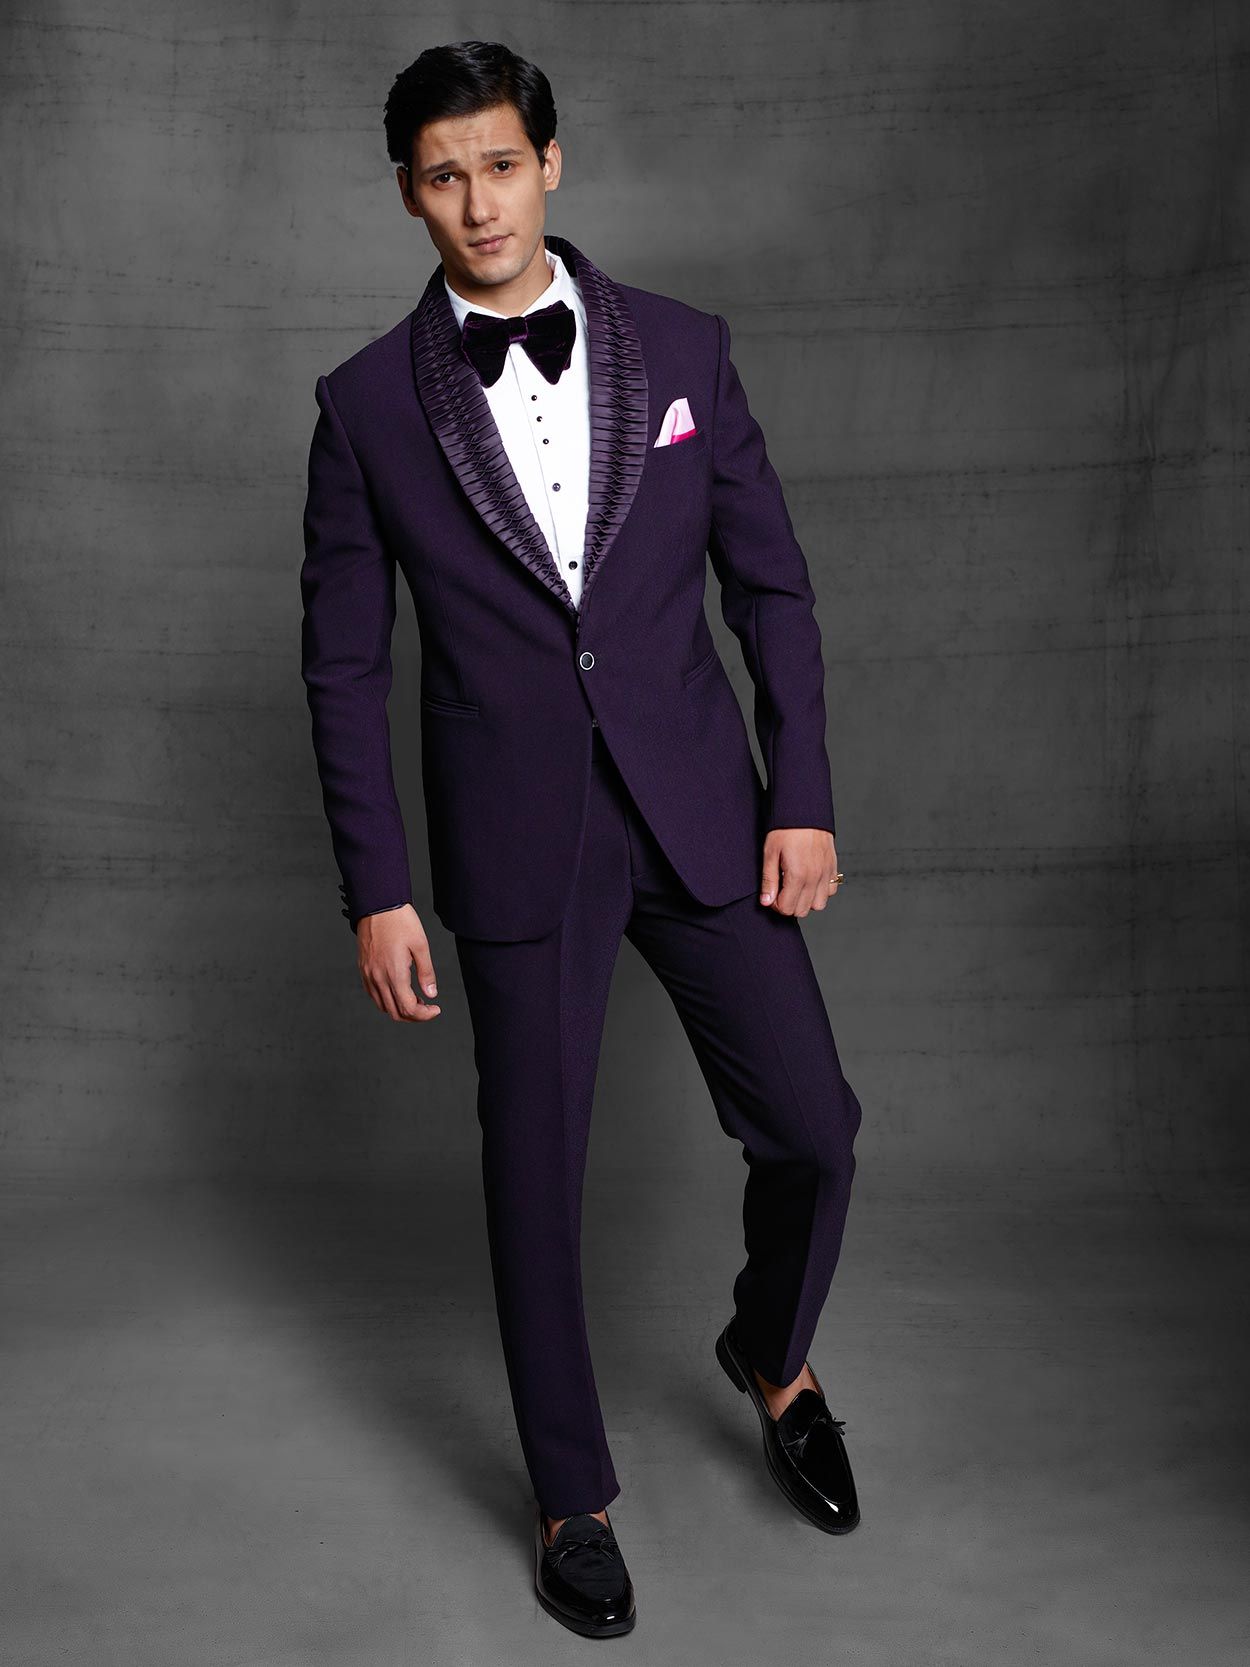 Top Wedding Colors of 2019 & Groom's Style | Friar Tux